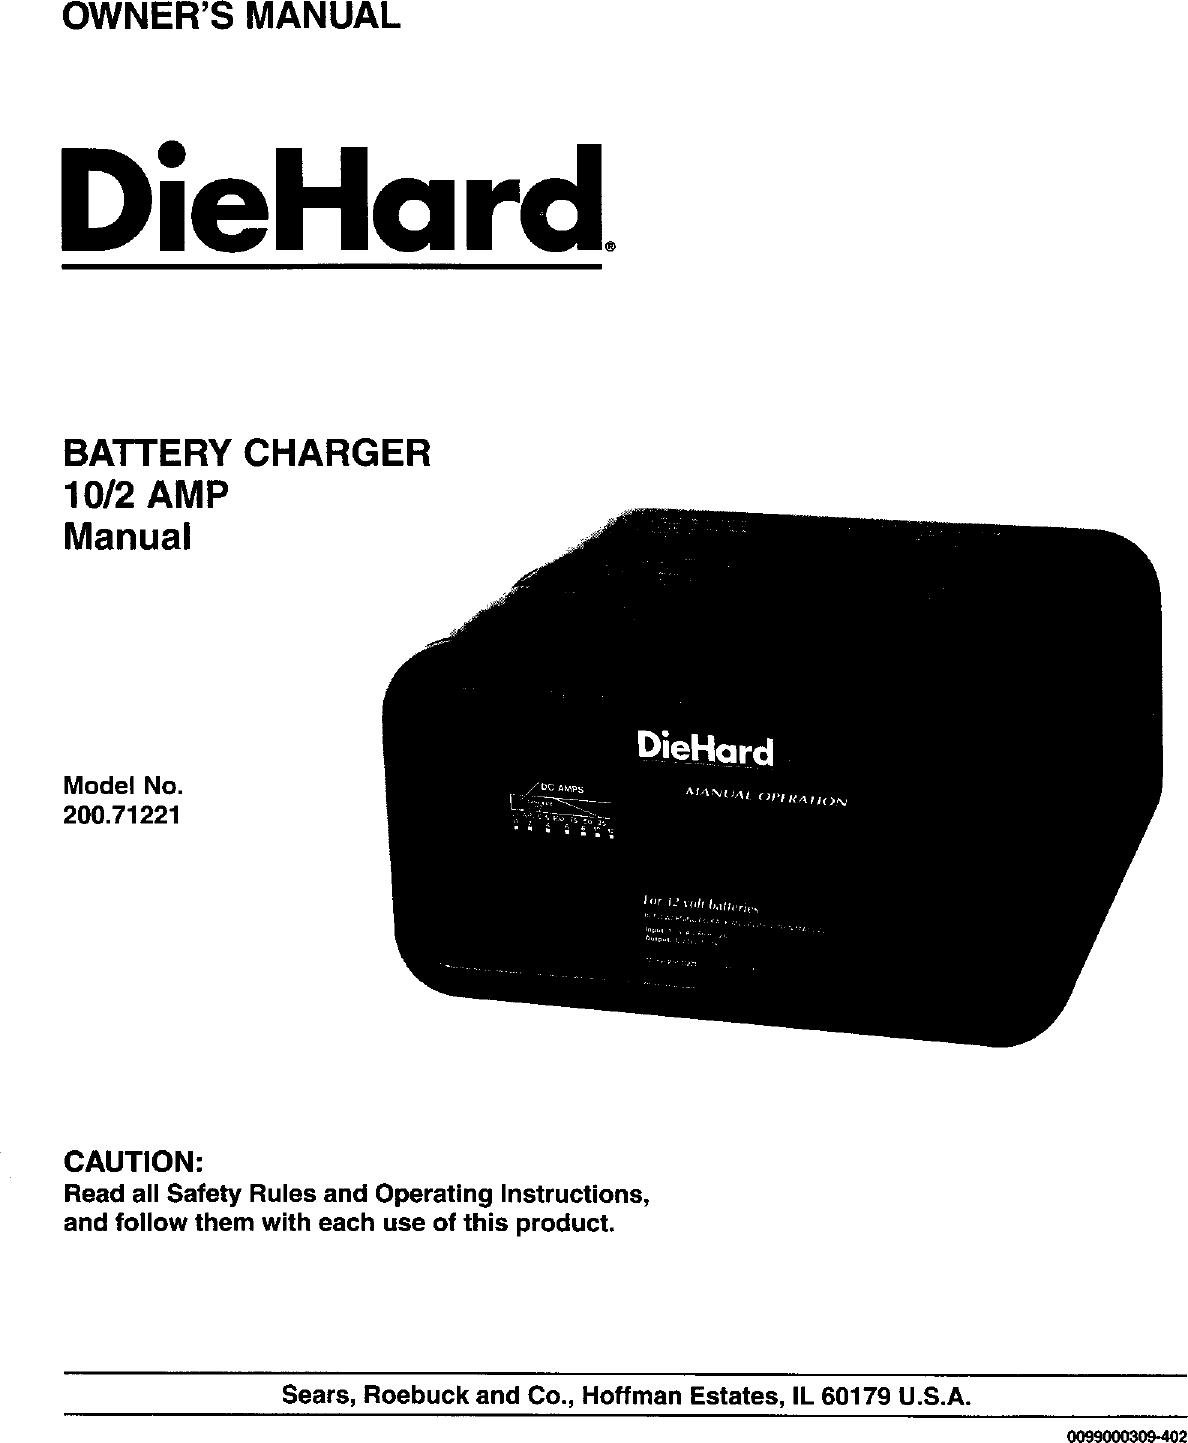 Diehard 20071221 User Manual BATTERY CHARGER Manuals And Guides L0305330